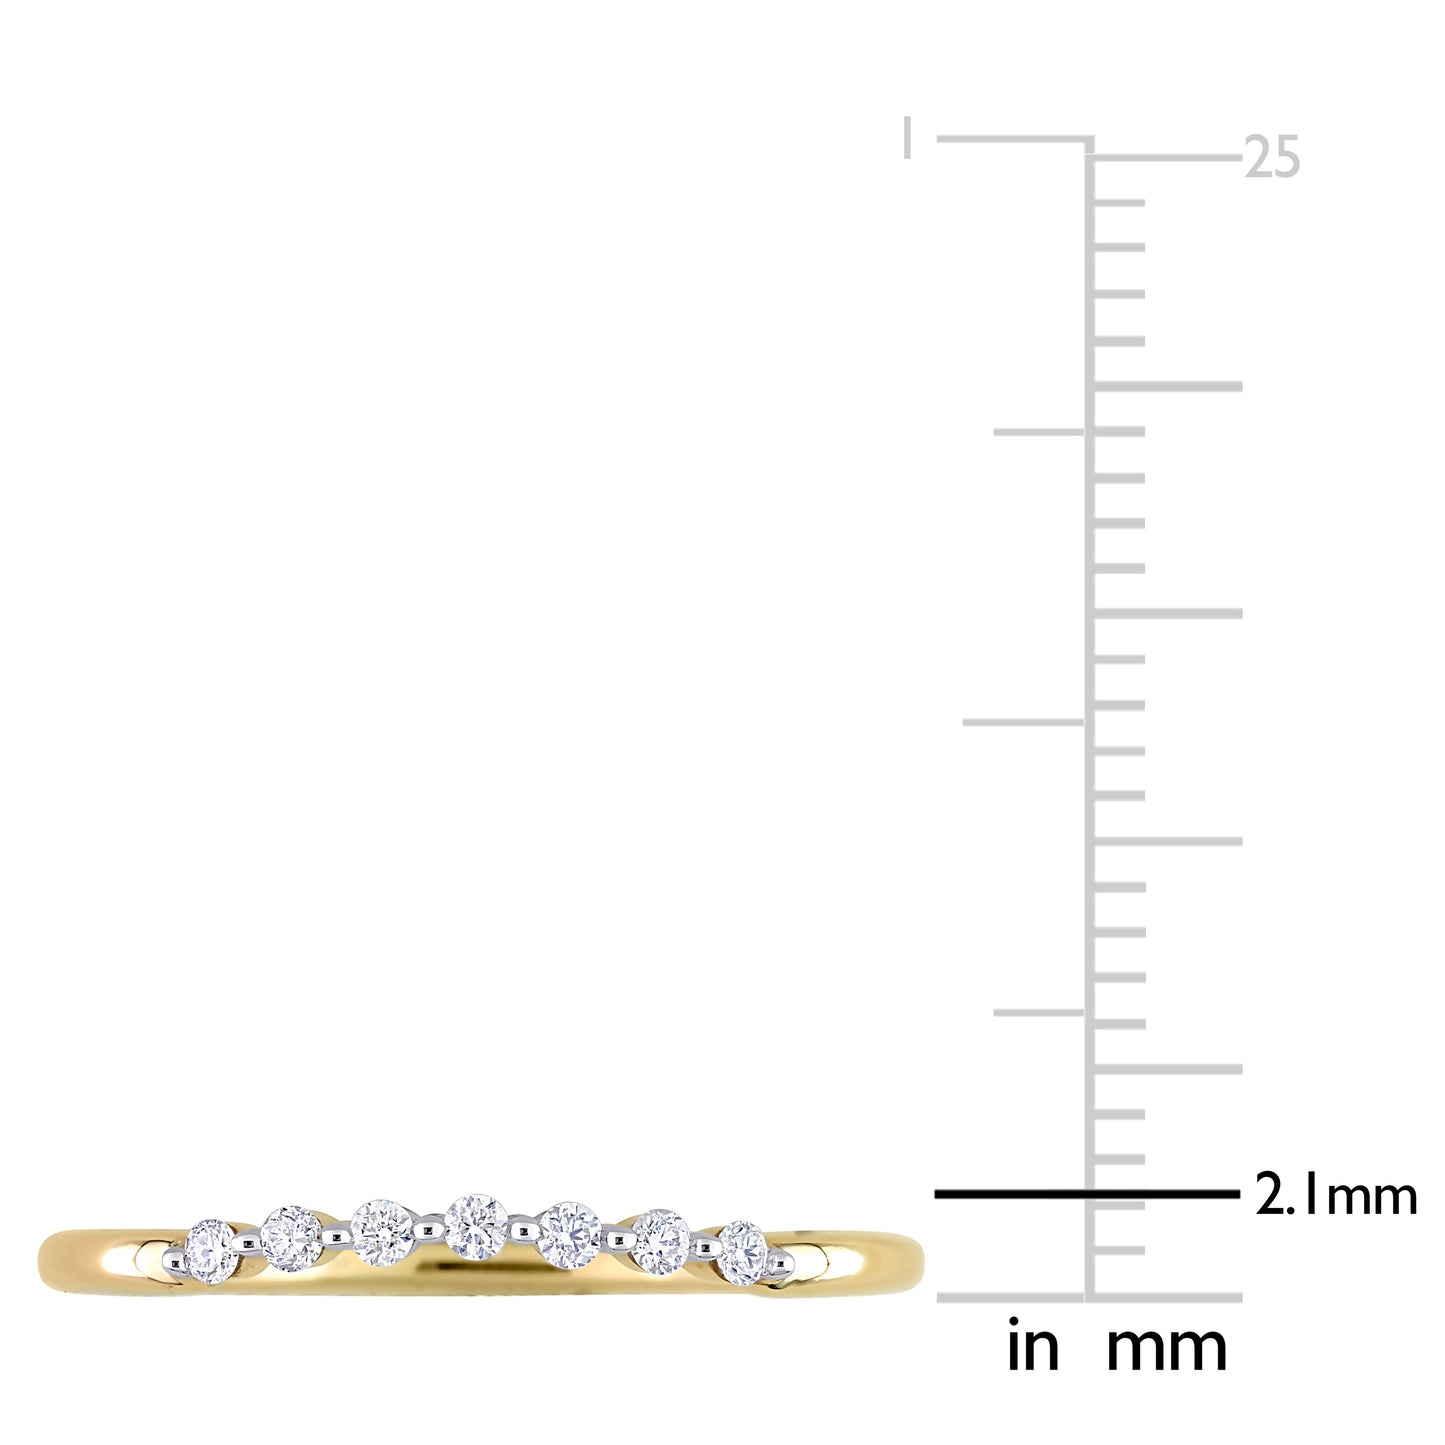 7-Stone Curved Diamond Ring in 10k Yellow Gold